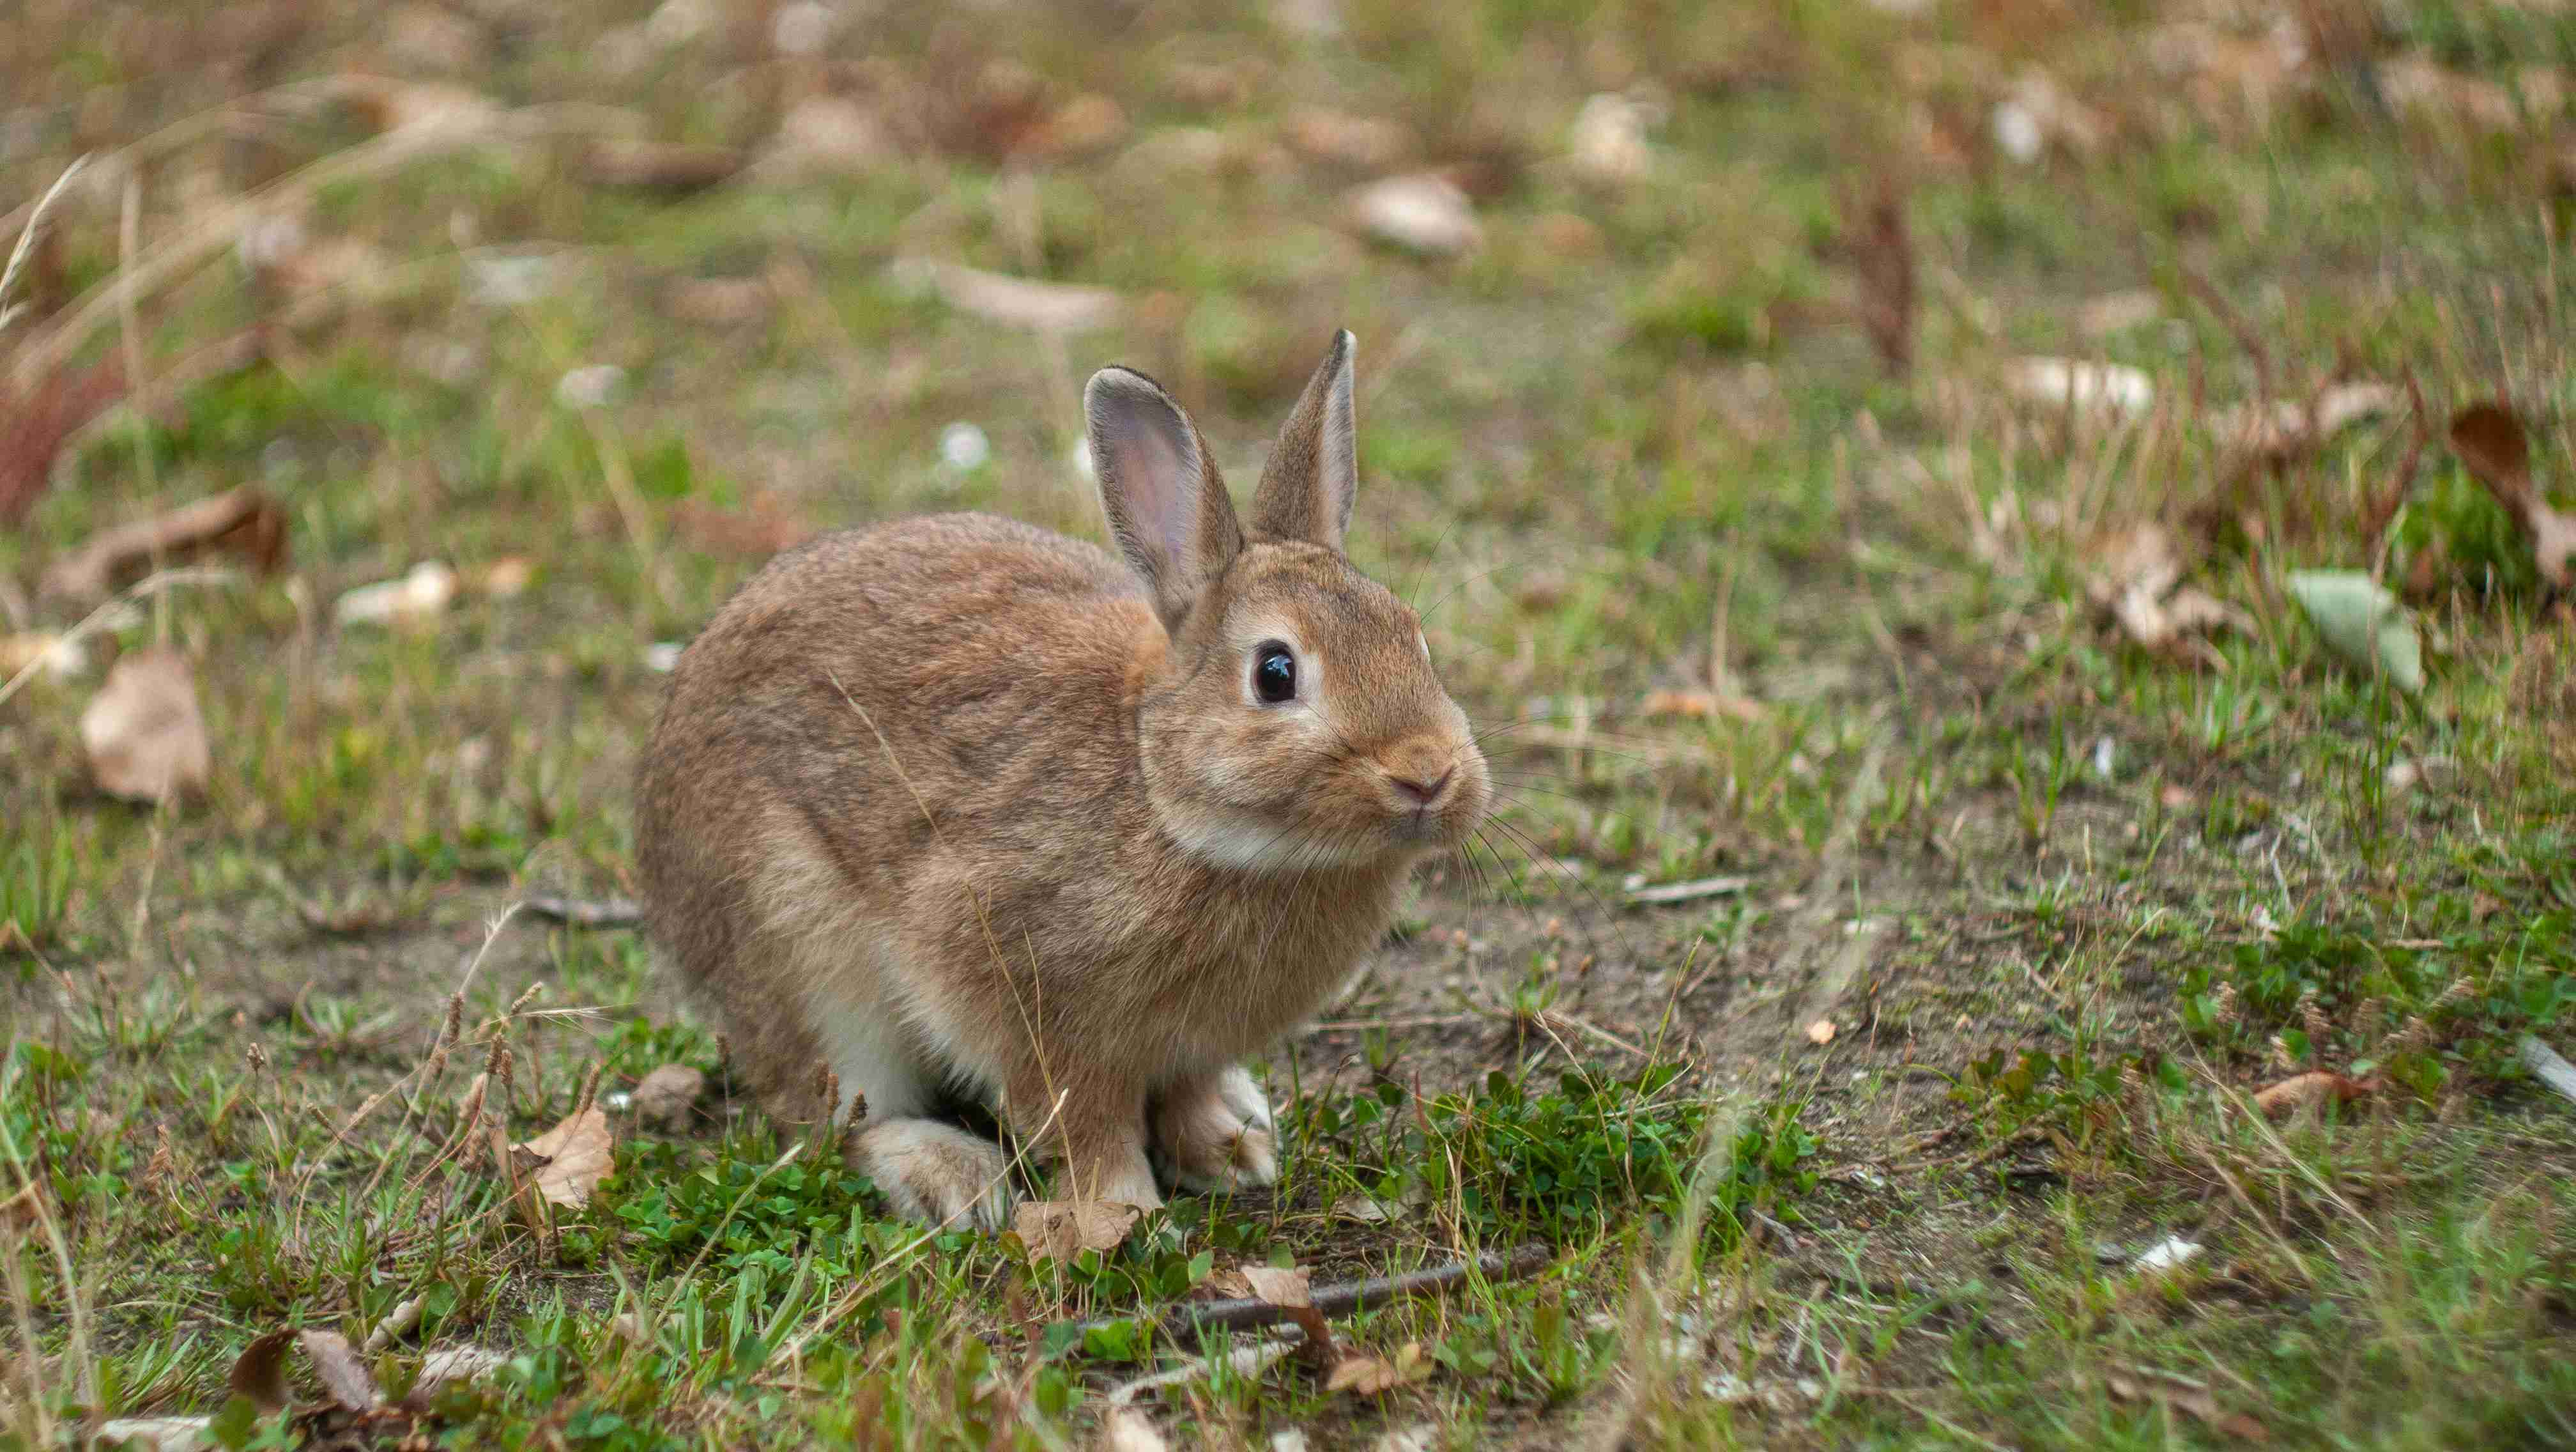 10 Effective Ways to Prevent Parasite Infestations in Your Rabbit